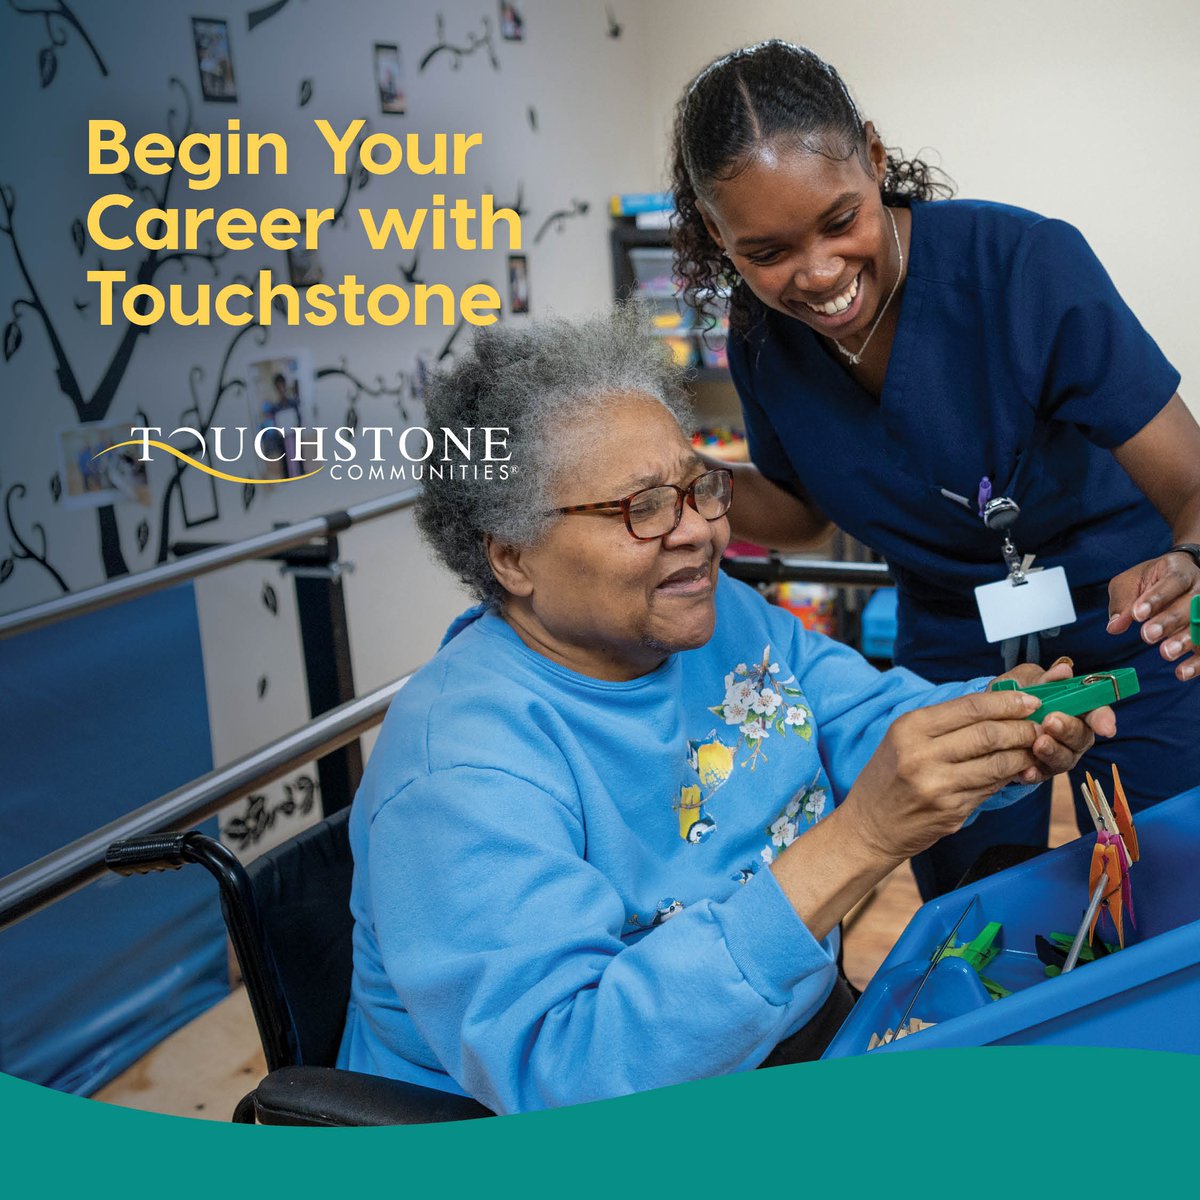 Your expertise and compassion are valued at Touchstone Communities. With locations across Texas, you can find your perfect new beginning and make a career with our best-in-class team. Apply today and Make Lives Better: jointeamtouchstone.com #JoinTeamTouchstone #SeniorCar...